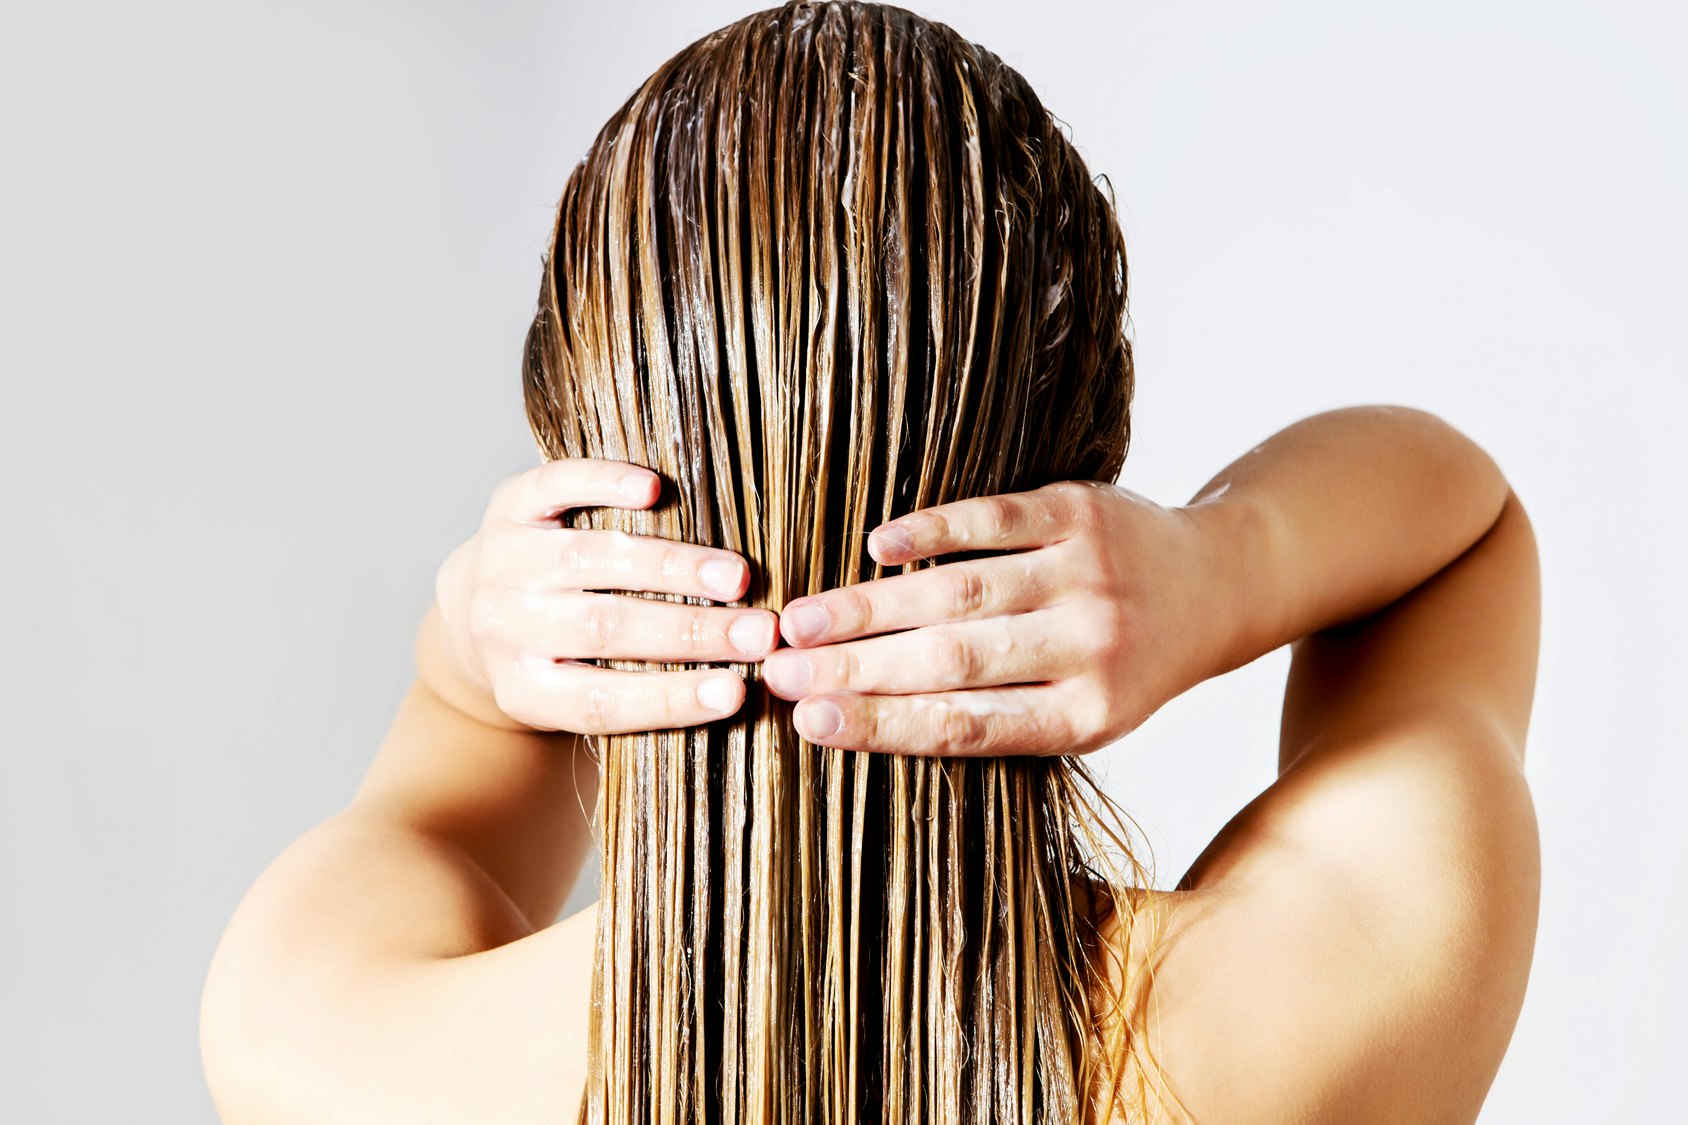 do you use hair putty on wet or dry hair